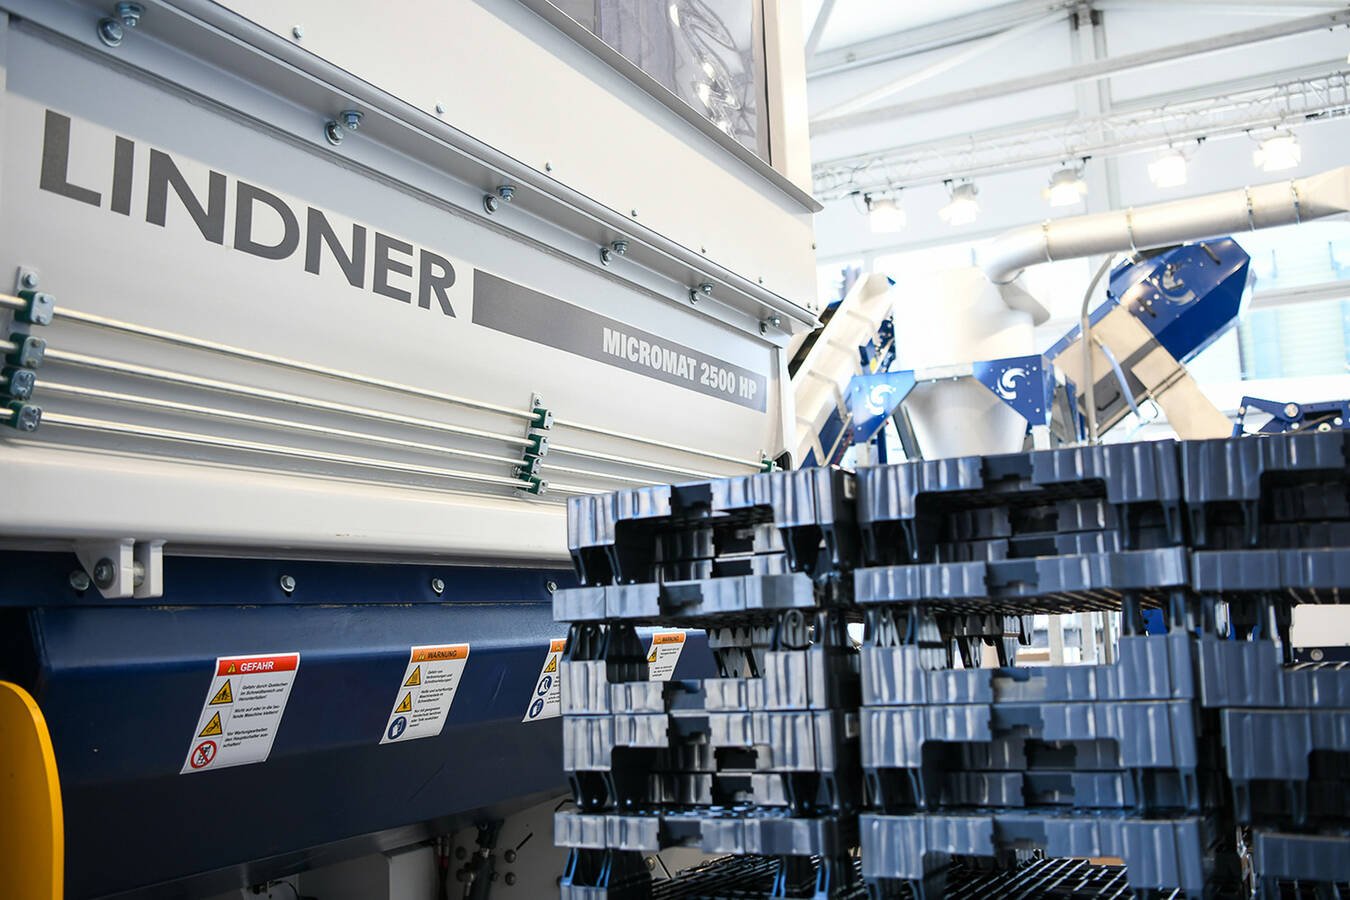 Lindner at K 2022: Innovative All-in-one Recycling Solutions Dusseldorf (Germany), November 2022. Recycling specialist Lindner showed all-in-one solutions for efficient plastics recycling at K 2022 in Hall 9 and the outside area as part of the VDMA Circular Economy Forum.  